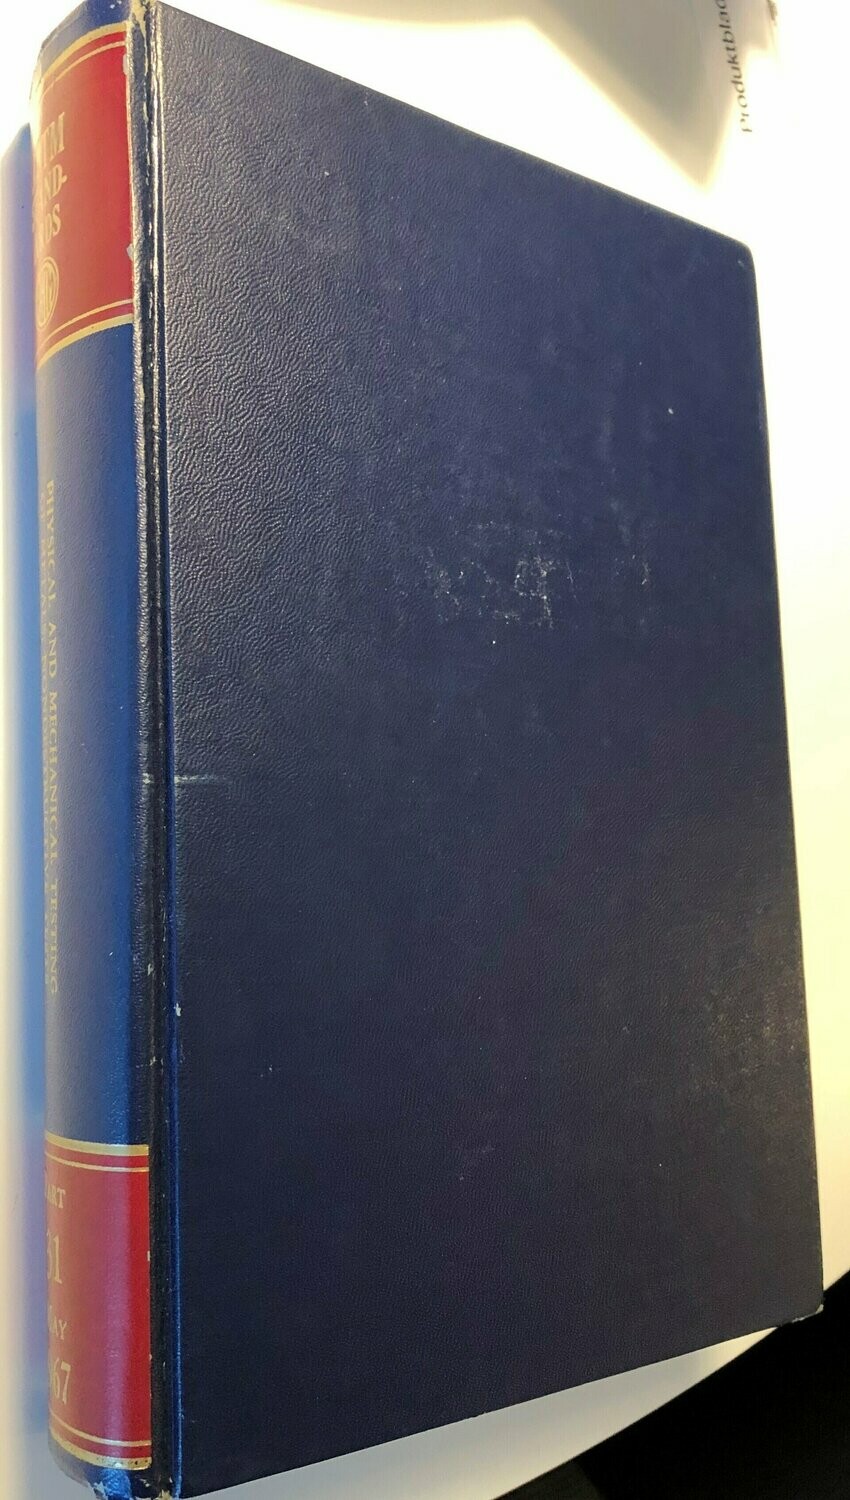 1967 Book of astm standards Physical and mechanical testing of metals, nondestructive tests part 31